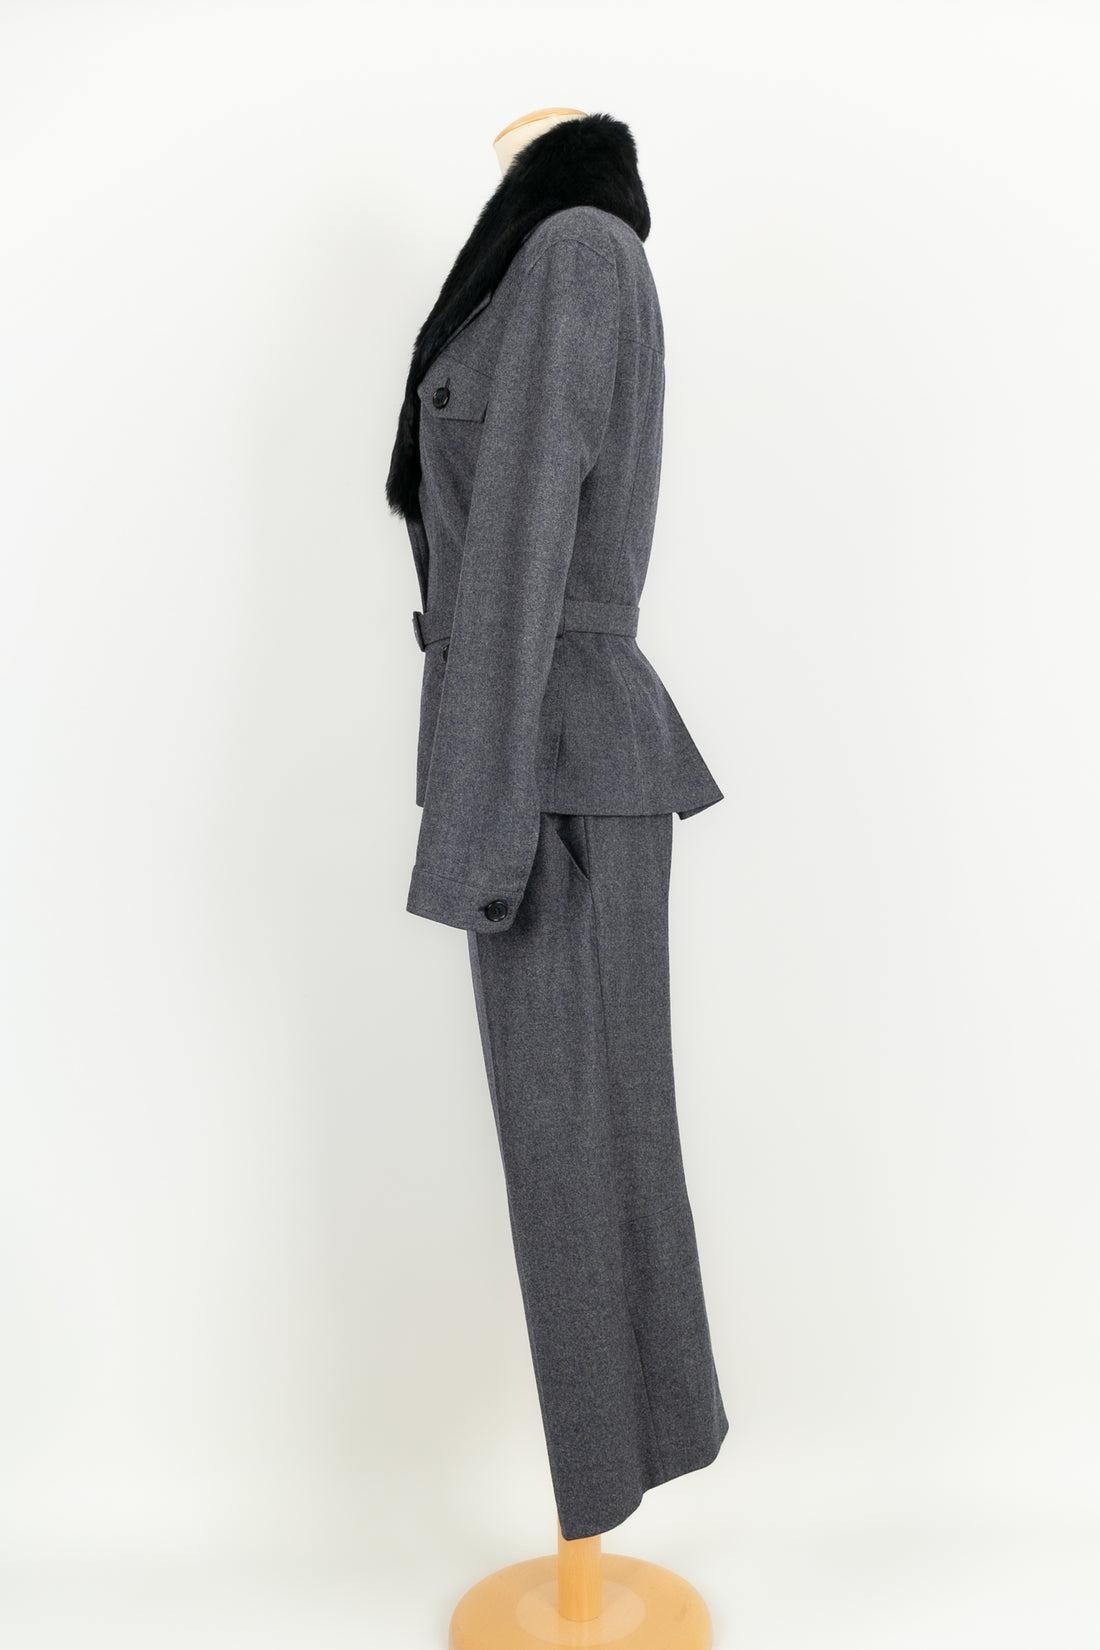 Alexander McQueen - (Made in Italy) Set consisting of a jacket, skirt and wool pants. Size indicated 42IT, it fits a 38FR/40FR. Collection 2005.

Additional information: 
Dimensions: Jacket: Shoulder width: 42 cm, Chest: 45 cm, Waist: 36 cm, Sleeve